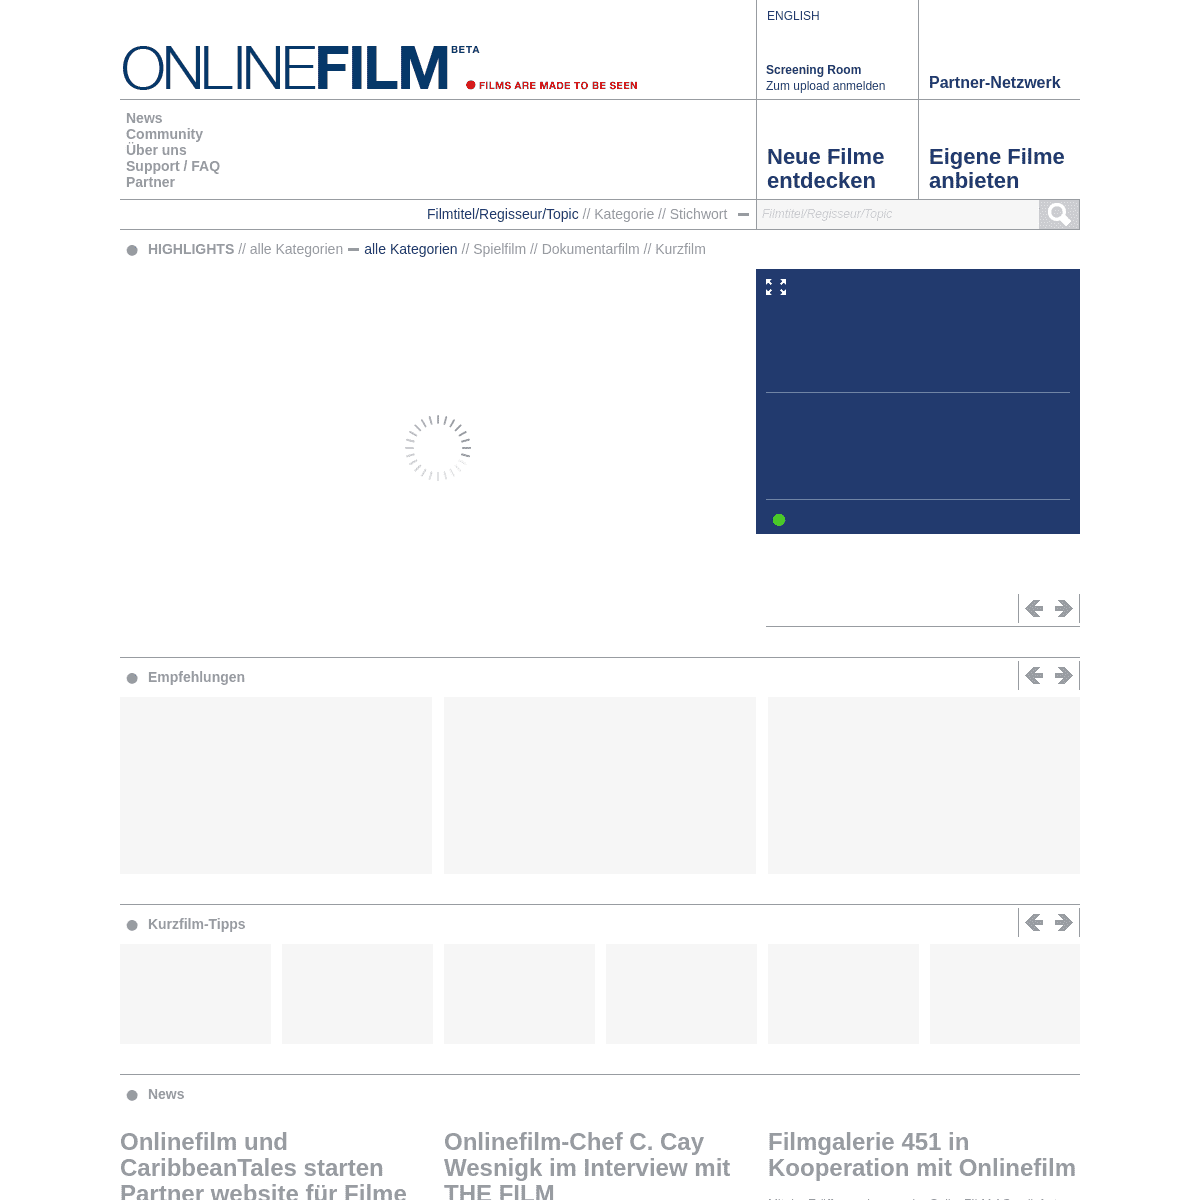 A complete backup of https://onlinefilm.org